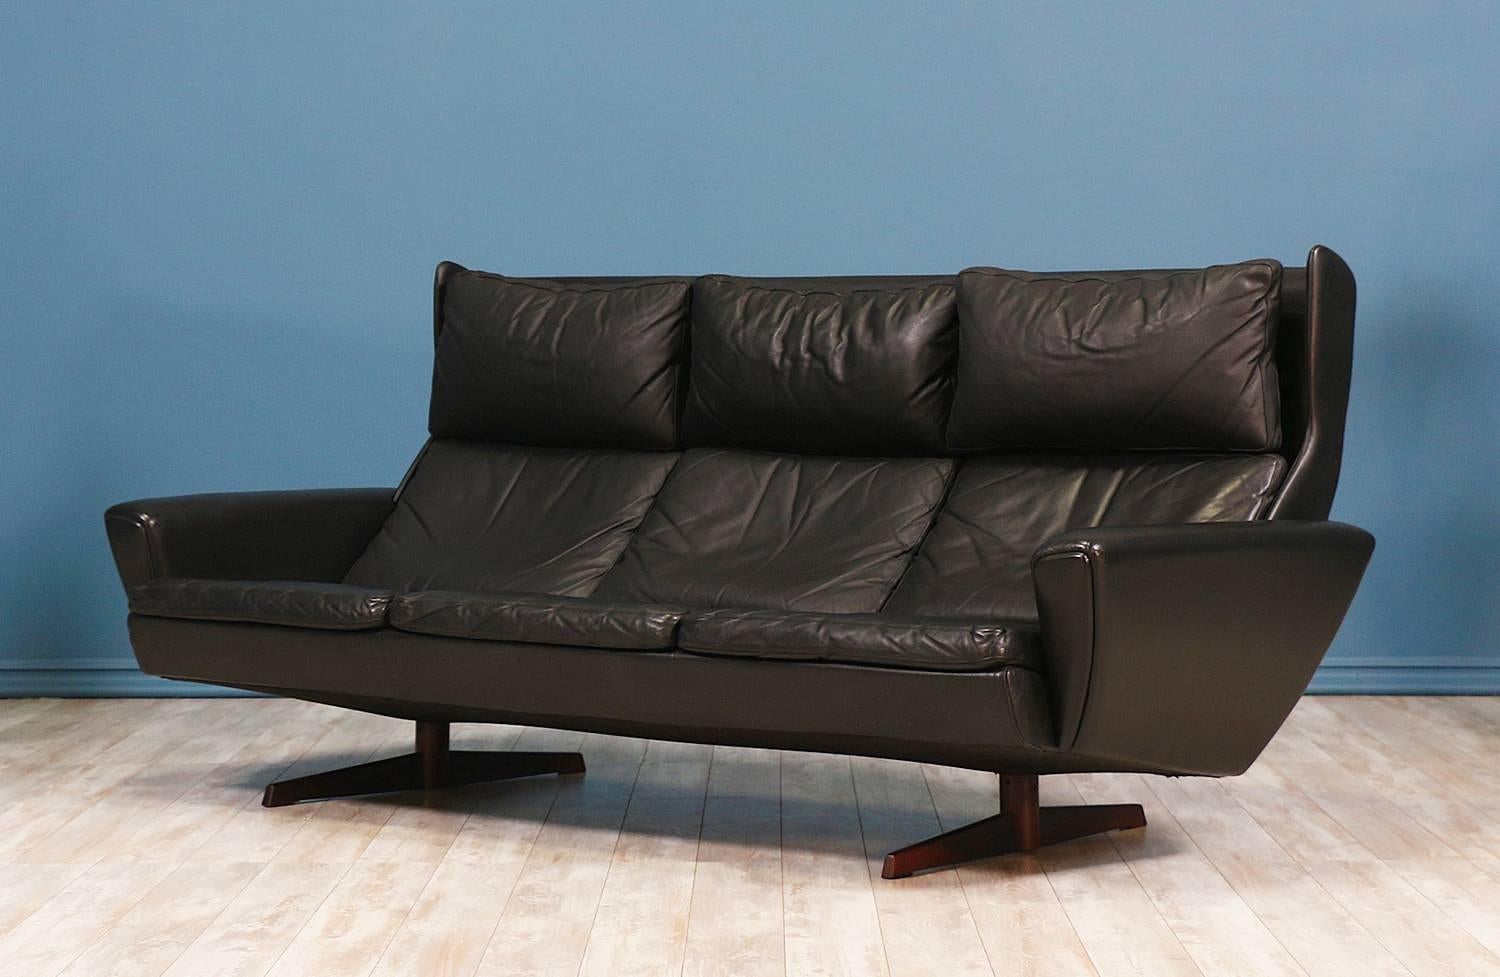 Winged back sofa designed in Denmark by Georg Thams for Vejen Polstermøbelfabrik circa 1970’s. This lovely sofa features newly refinished solid rosewood propeller legs and its original black leather upholstery displaying a beautiful age-appropriate